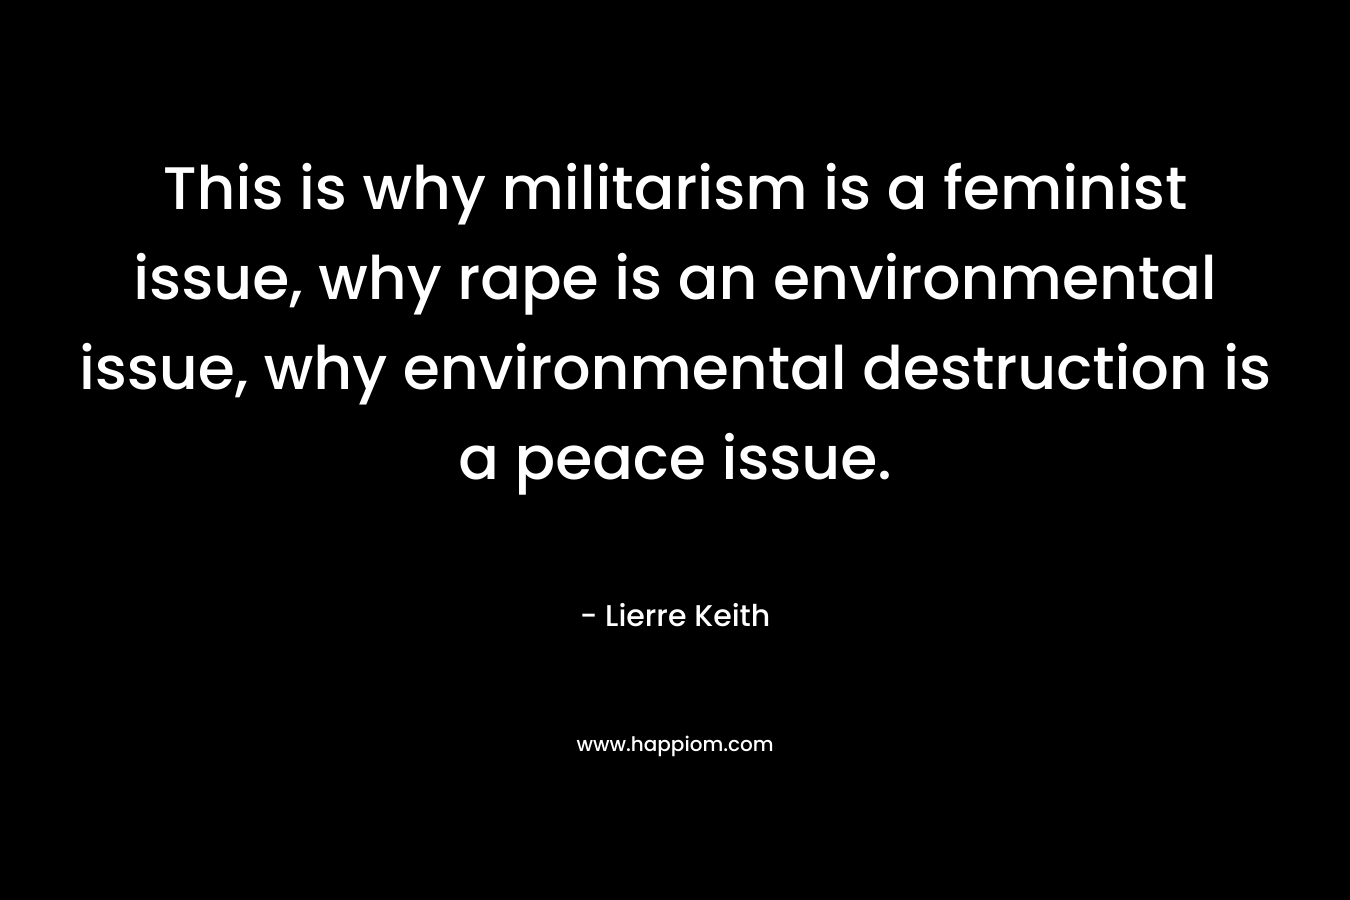 This is why militarism is a feminist issue, why rape is an environmental issue, why environmental destruction is a peace issue.